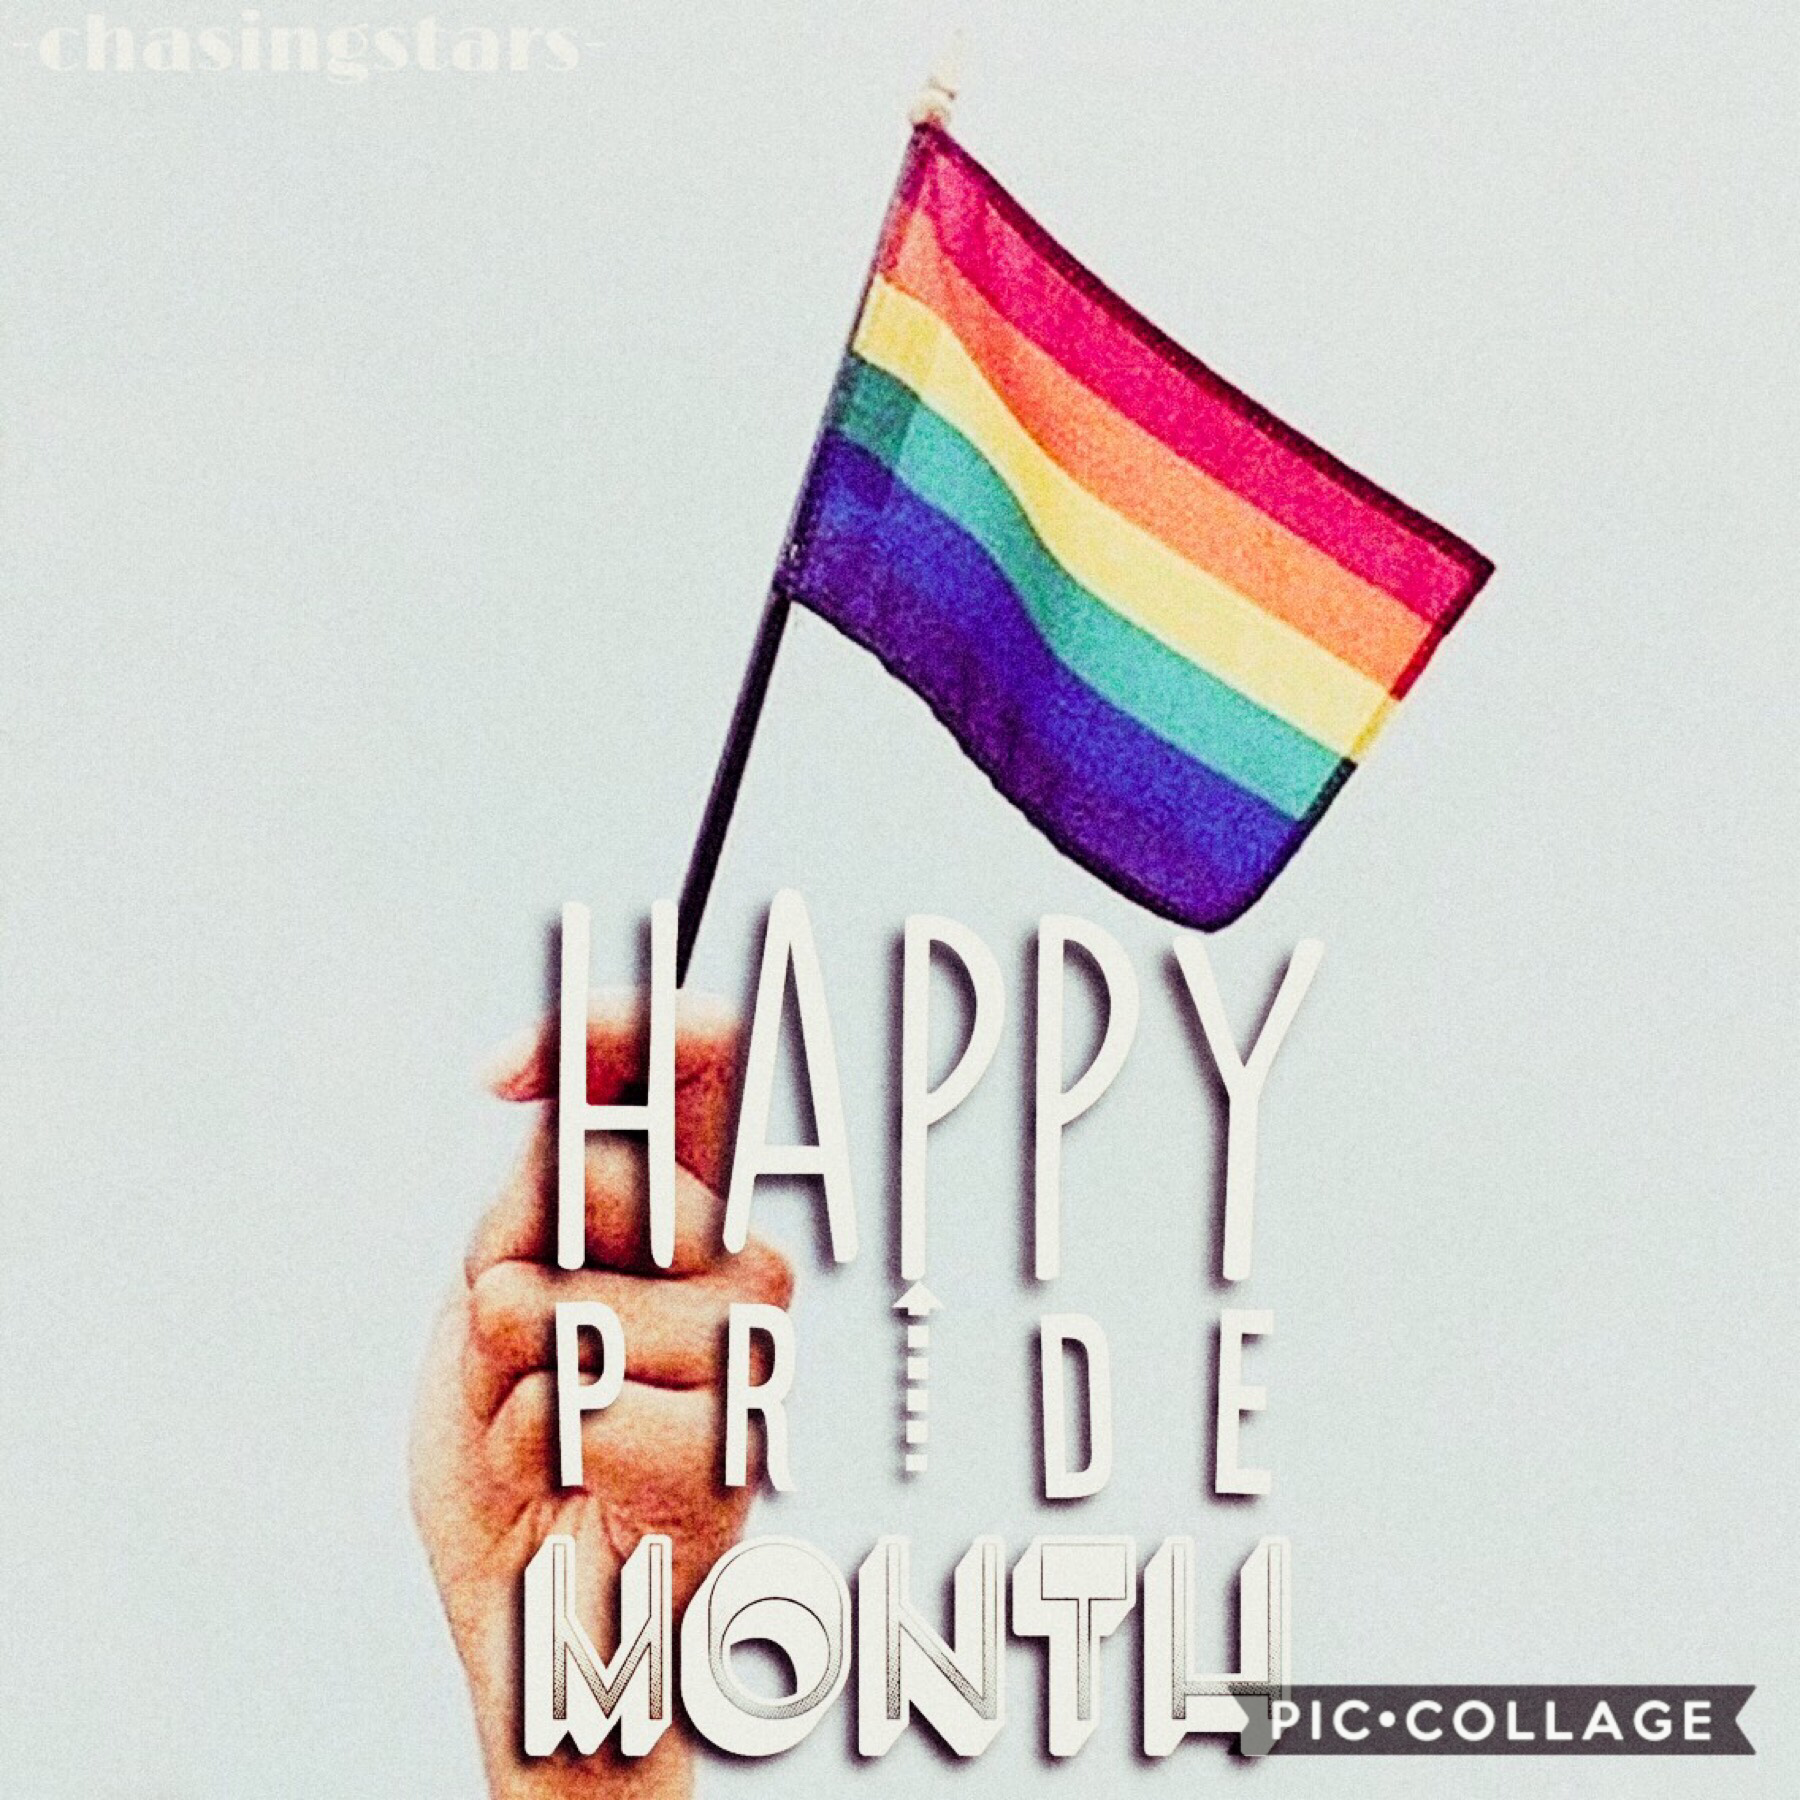 rEeeEeEe 🏳️‍🌈 

happy pride month!! 

this is a very simple collage
bUt tHaT’S oKaY 👌 

have a fub month
fub is fun and fab
have lots of fub


👋👋👋